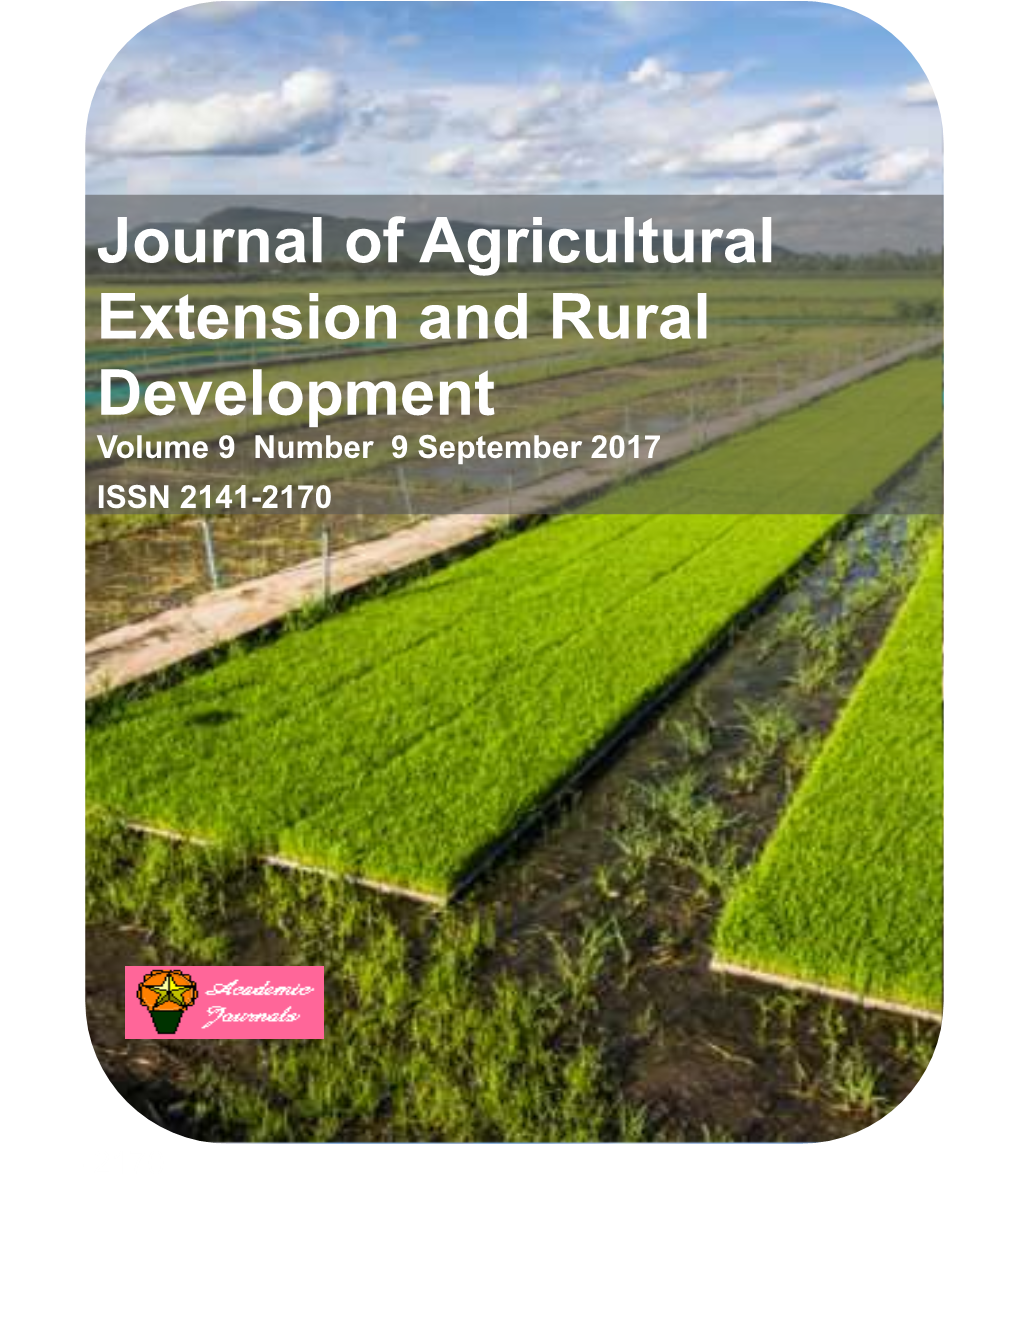 Journal of Agricultural Extension and Rural Development Volume 9 Number 9 September 2017 ISSN 2141-2170